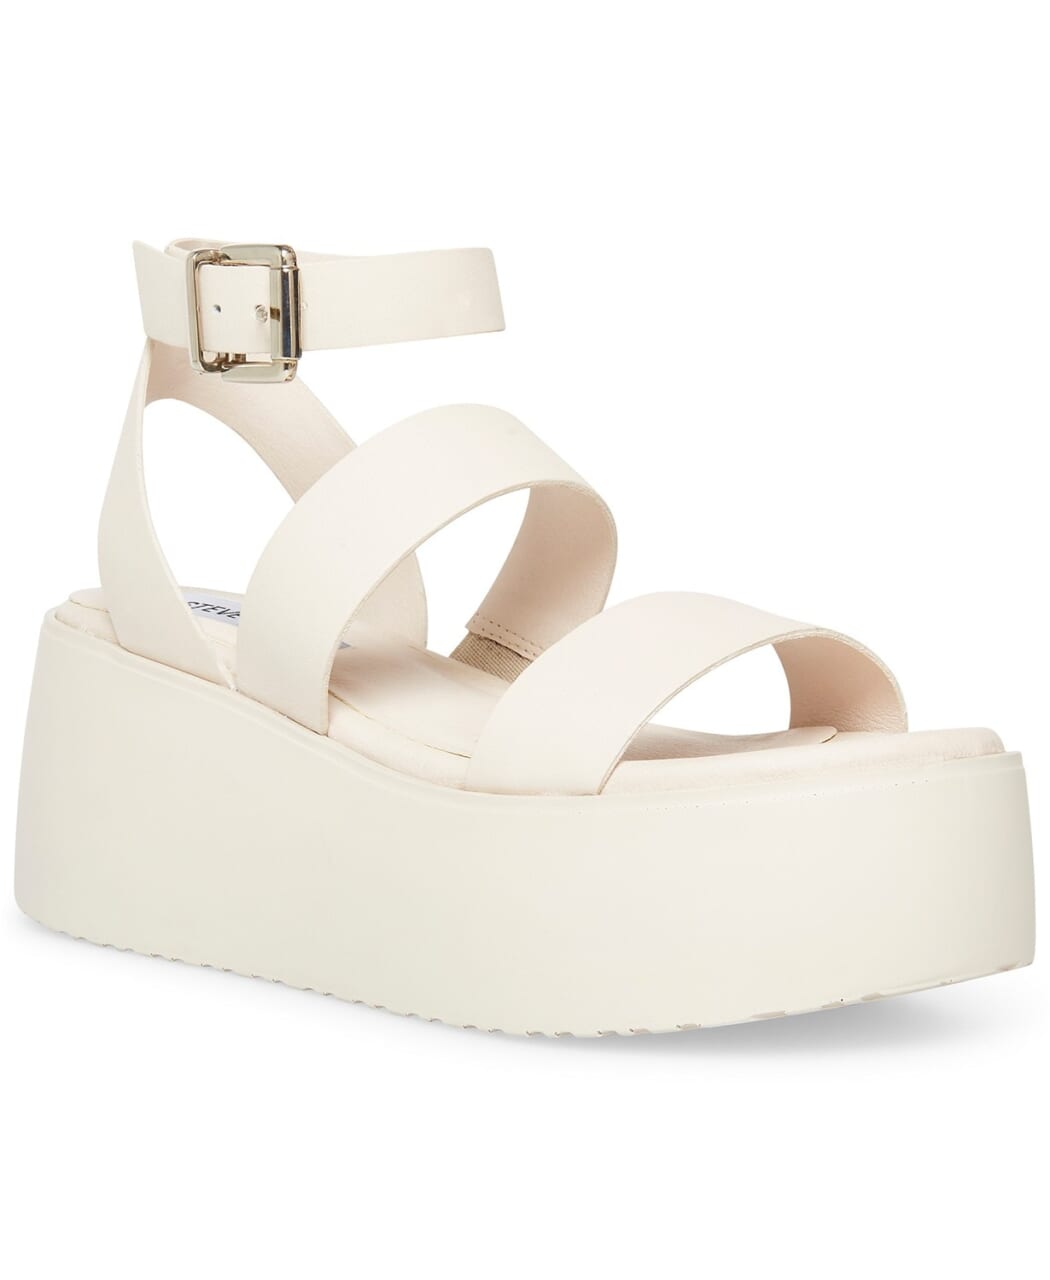 This Season's Hottest Sandal Trend Is All About Comfort 2